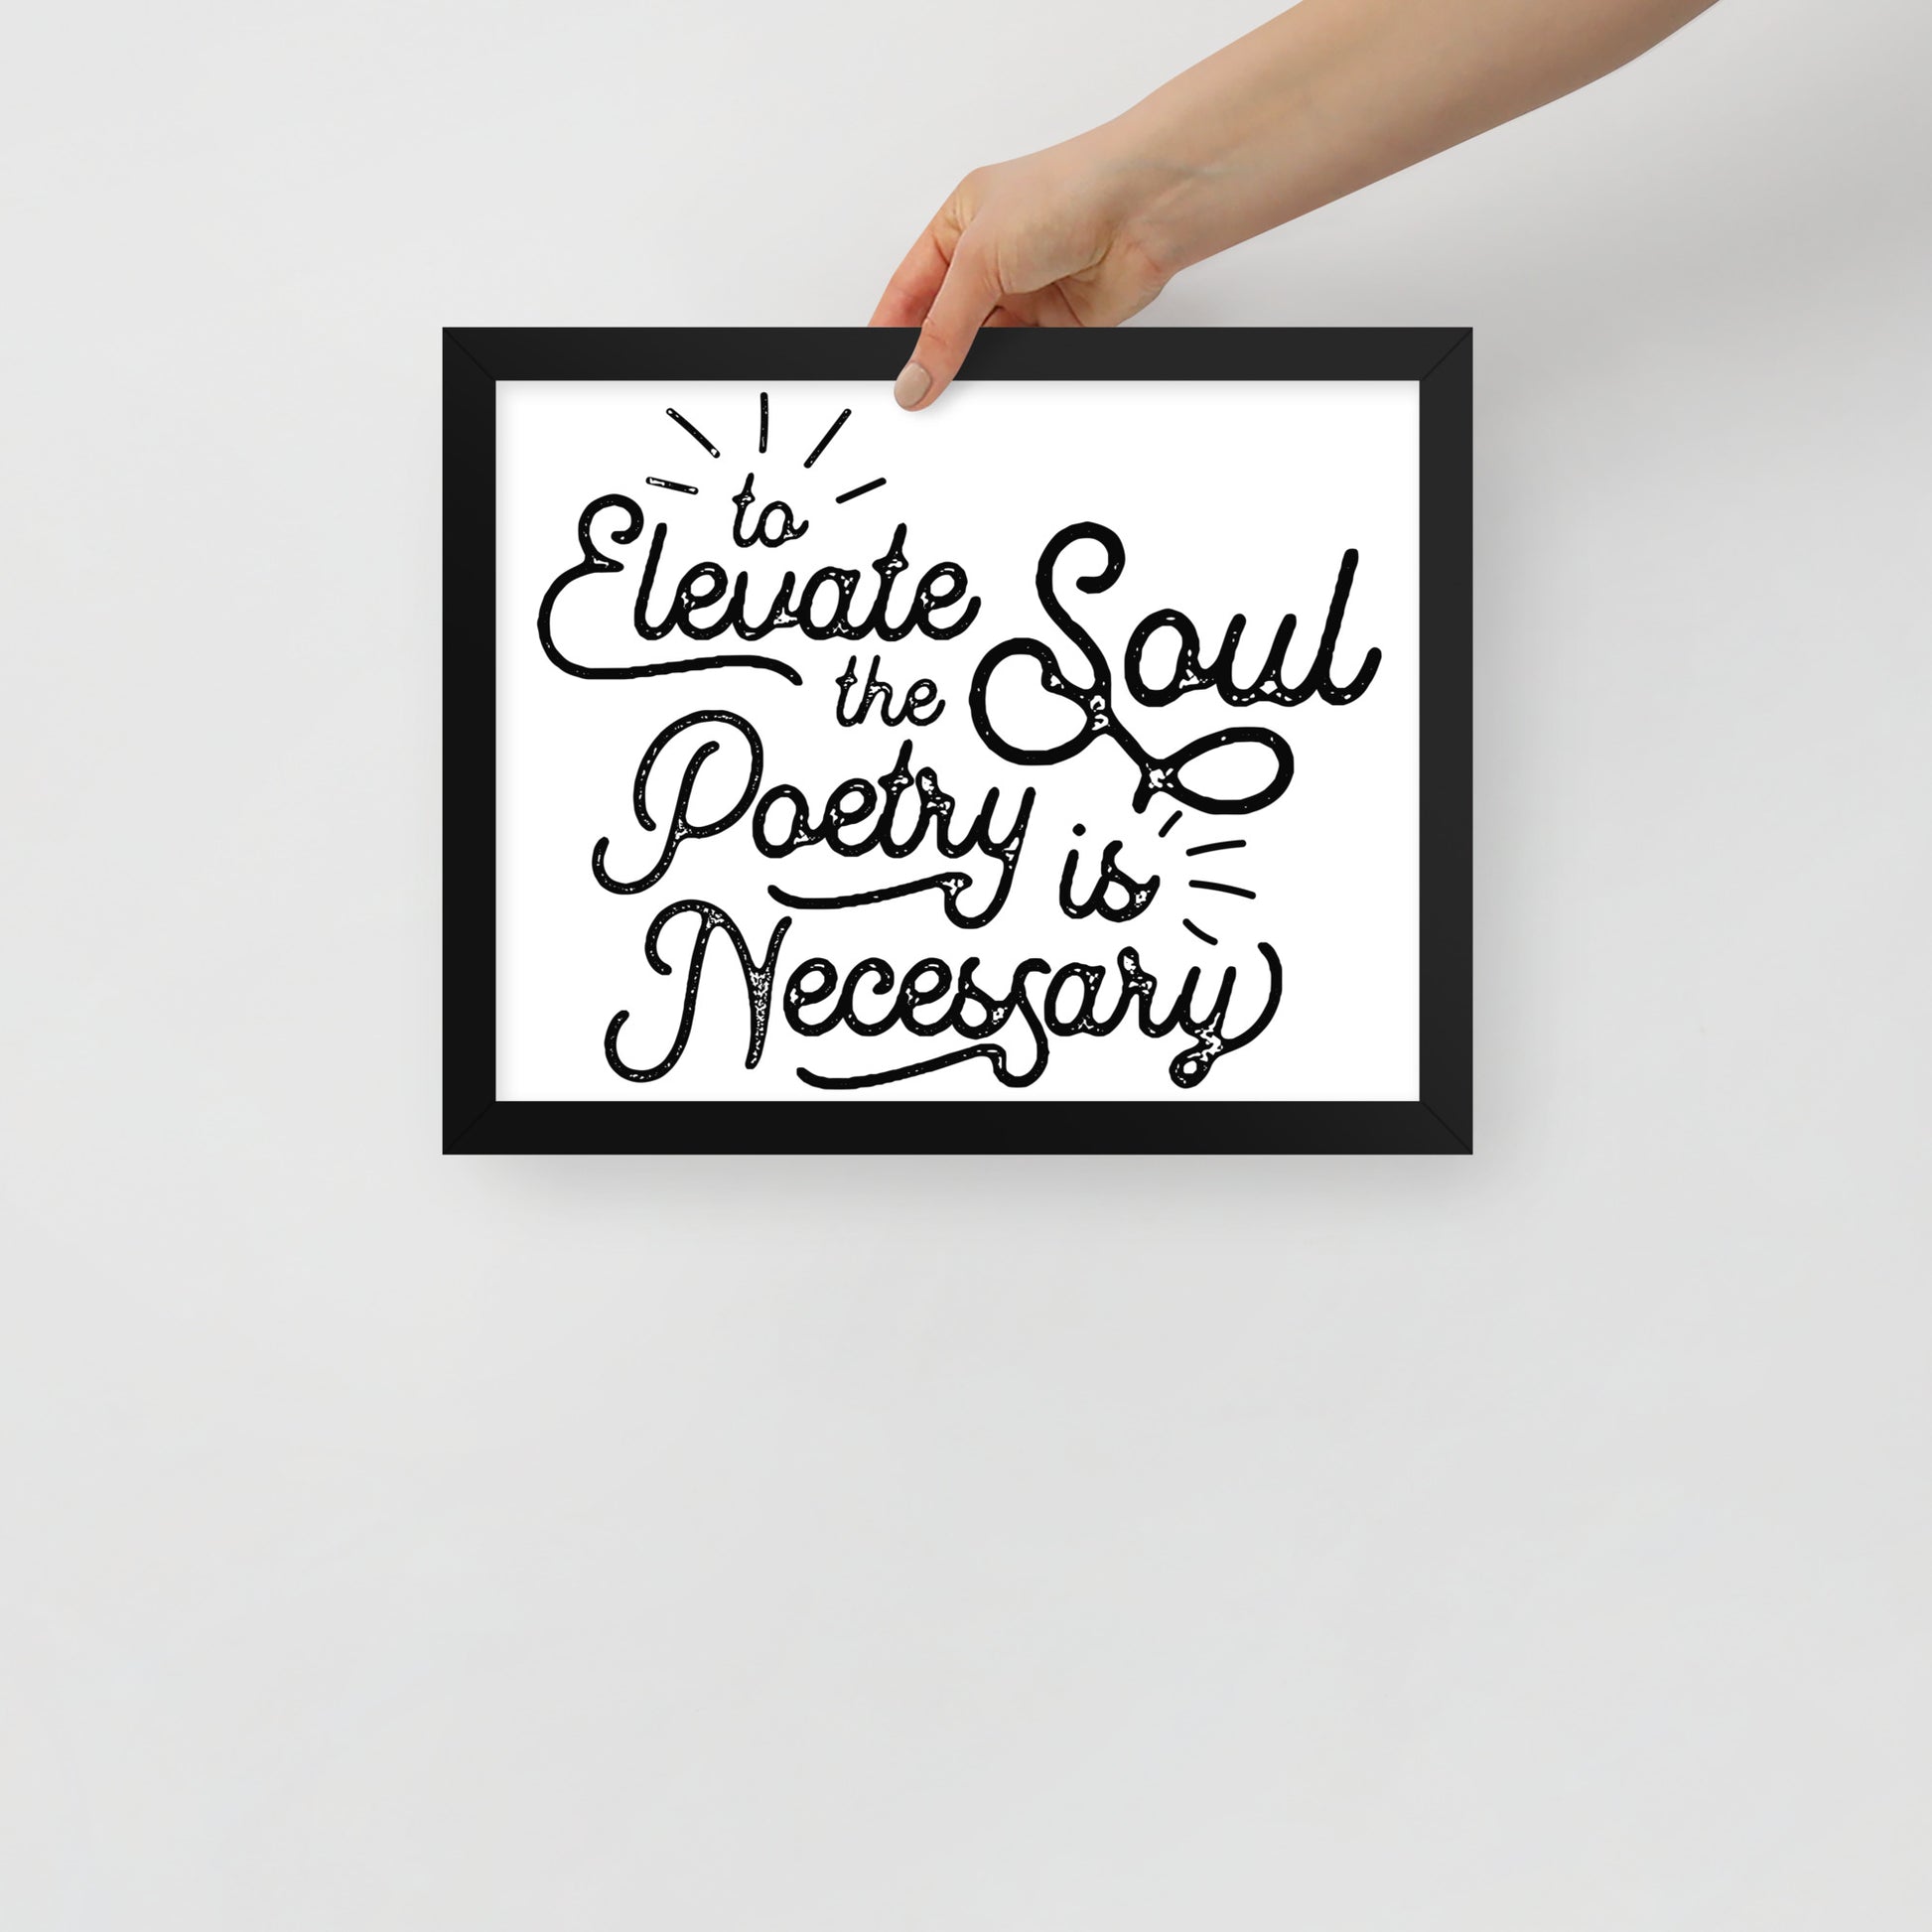 To Elevate the Soul Poetry is Necessary Framed Poster - 11 x 14 Black Frame